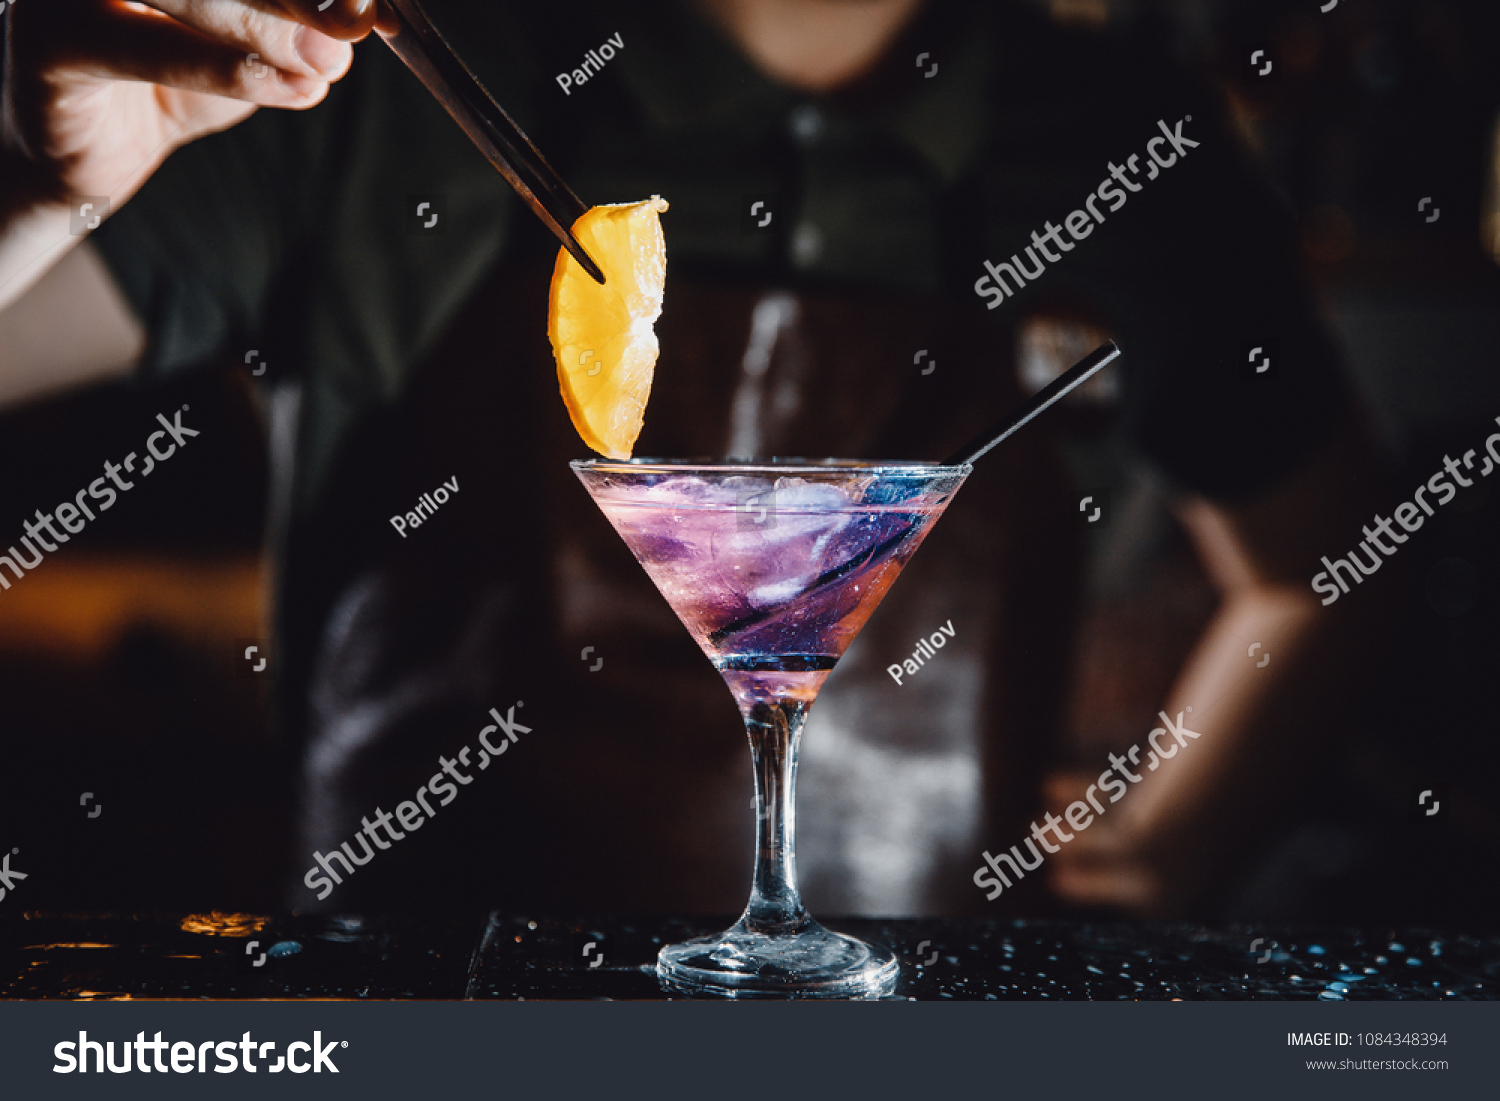 Barman prepares cocktail with orange and martini purple color on bar with alcohol. Uses tongs for decoration. Dark background. #1084348394